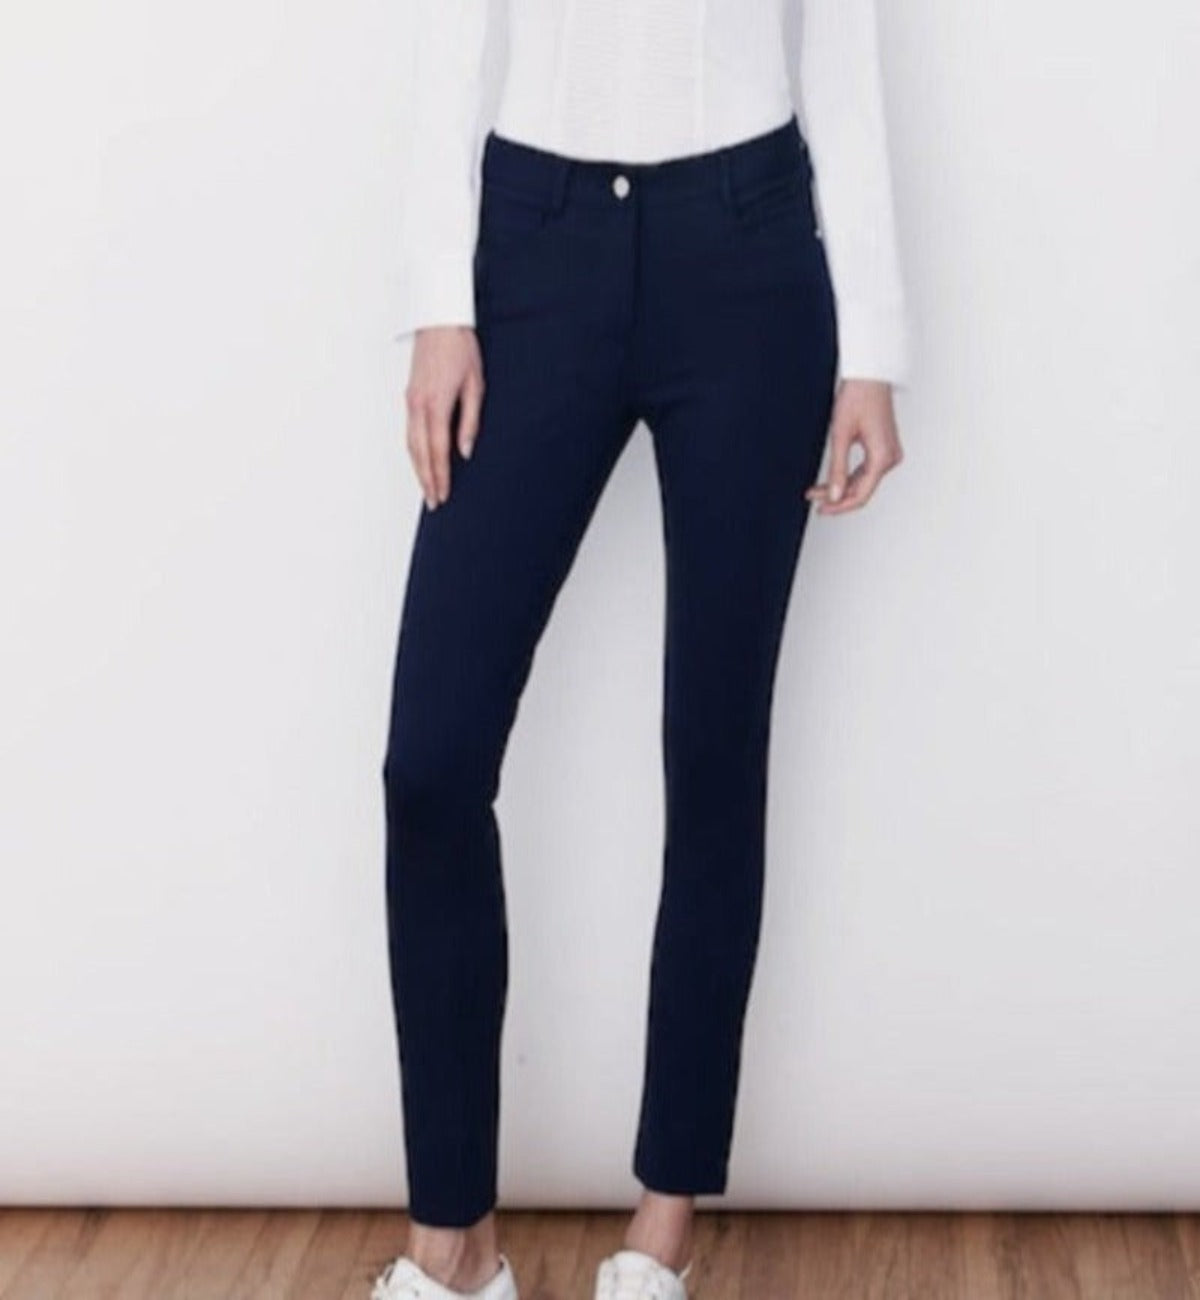 This photo shows the Jersey Stretch 5-Pocket Eliza Tailored Pant in Navy. This classic jean-style tailored knit pant features a front zipper closure, a sturdy shank button and belt loops. Featuring sustainable repurposed materials and Earth Friendly IDEAL Fastener Company Zippers.